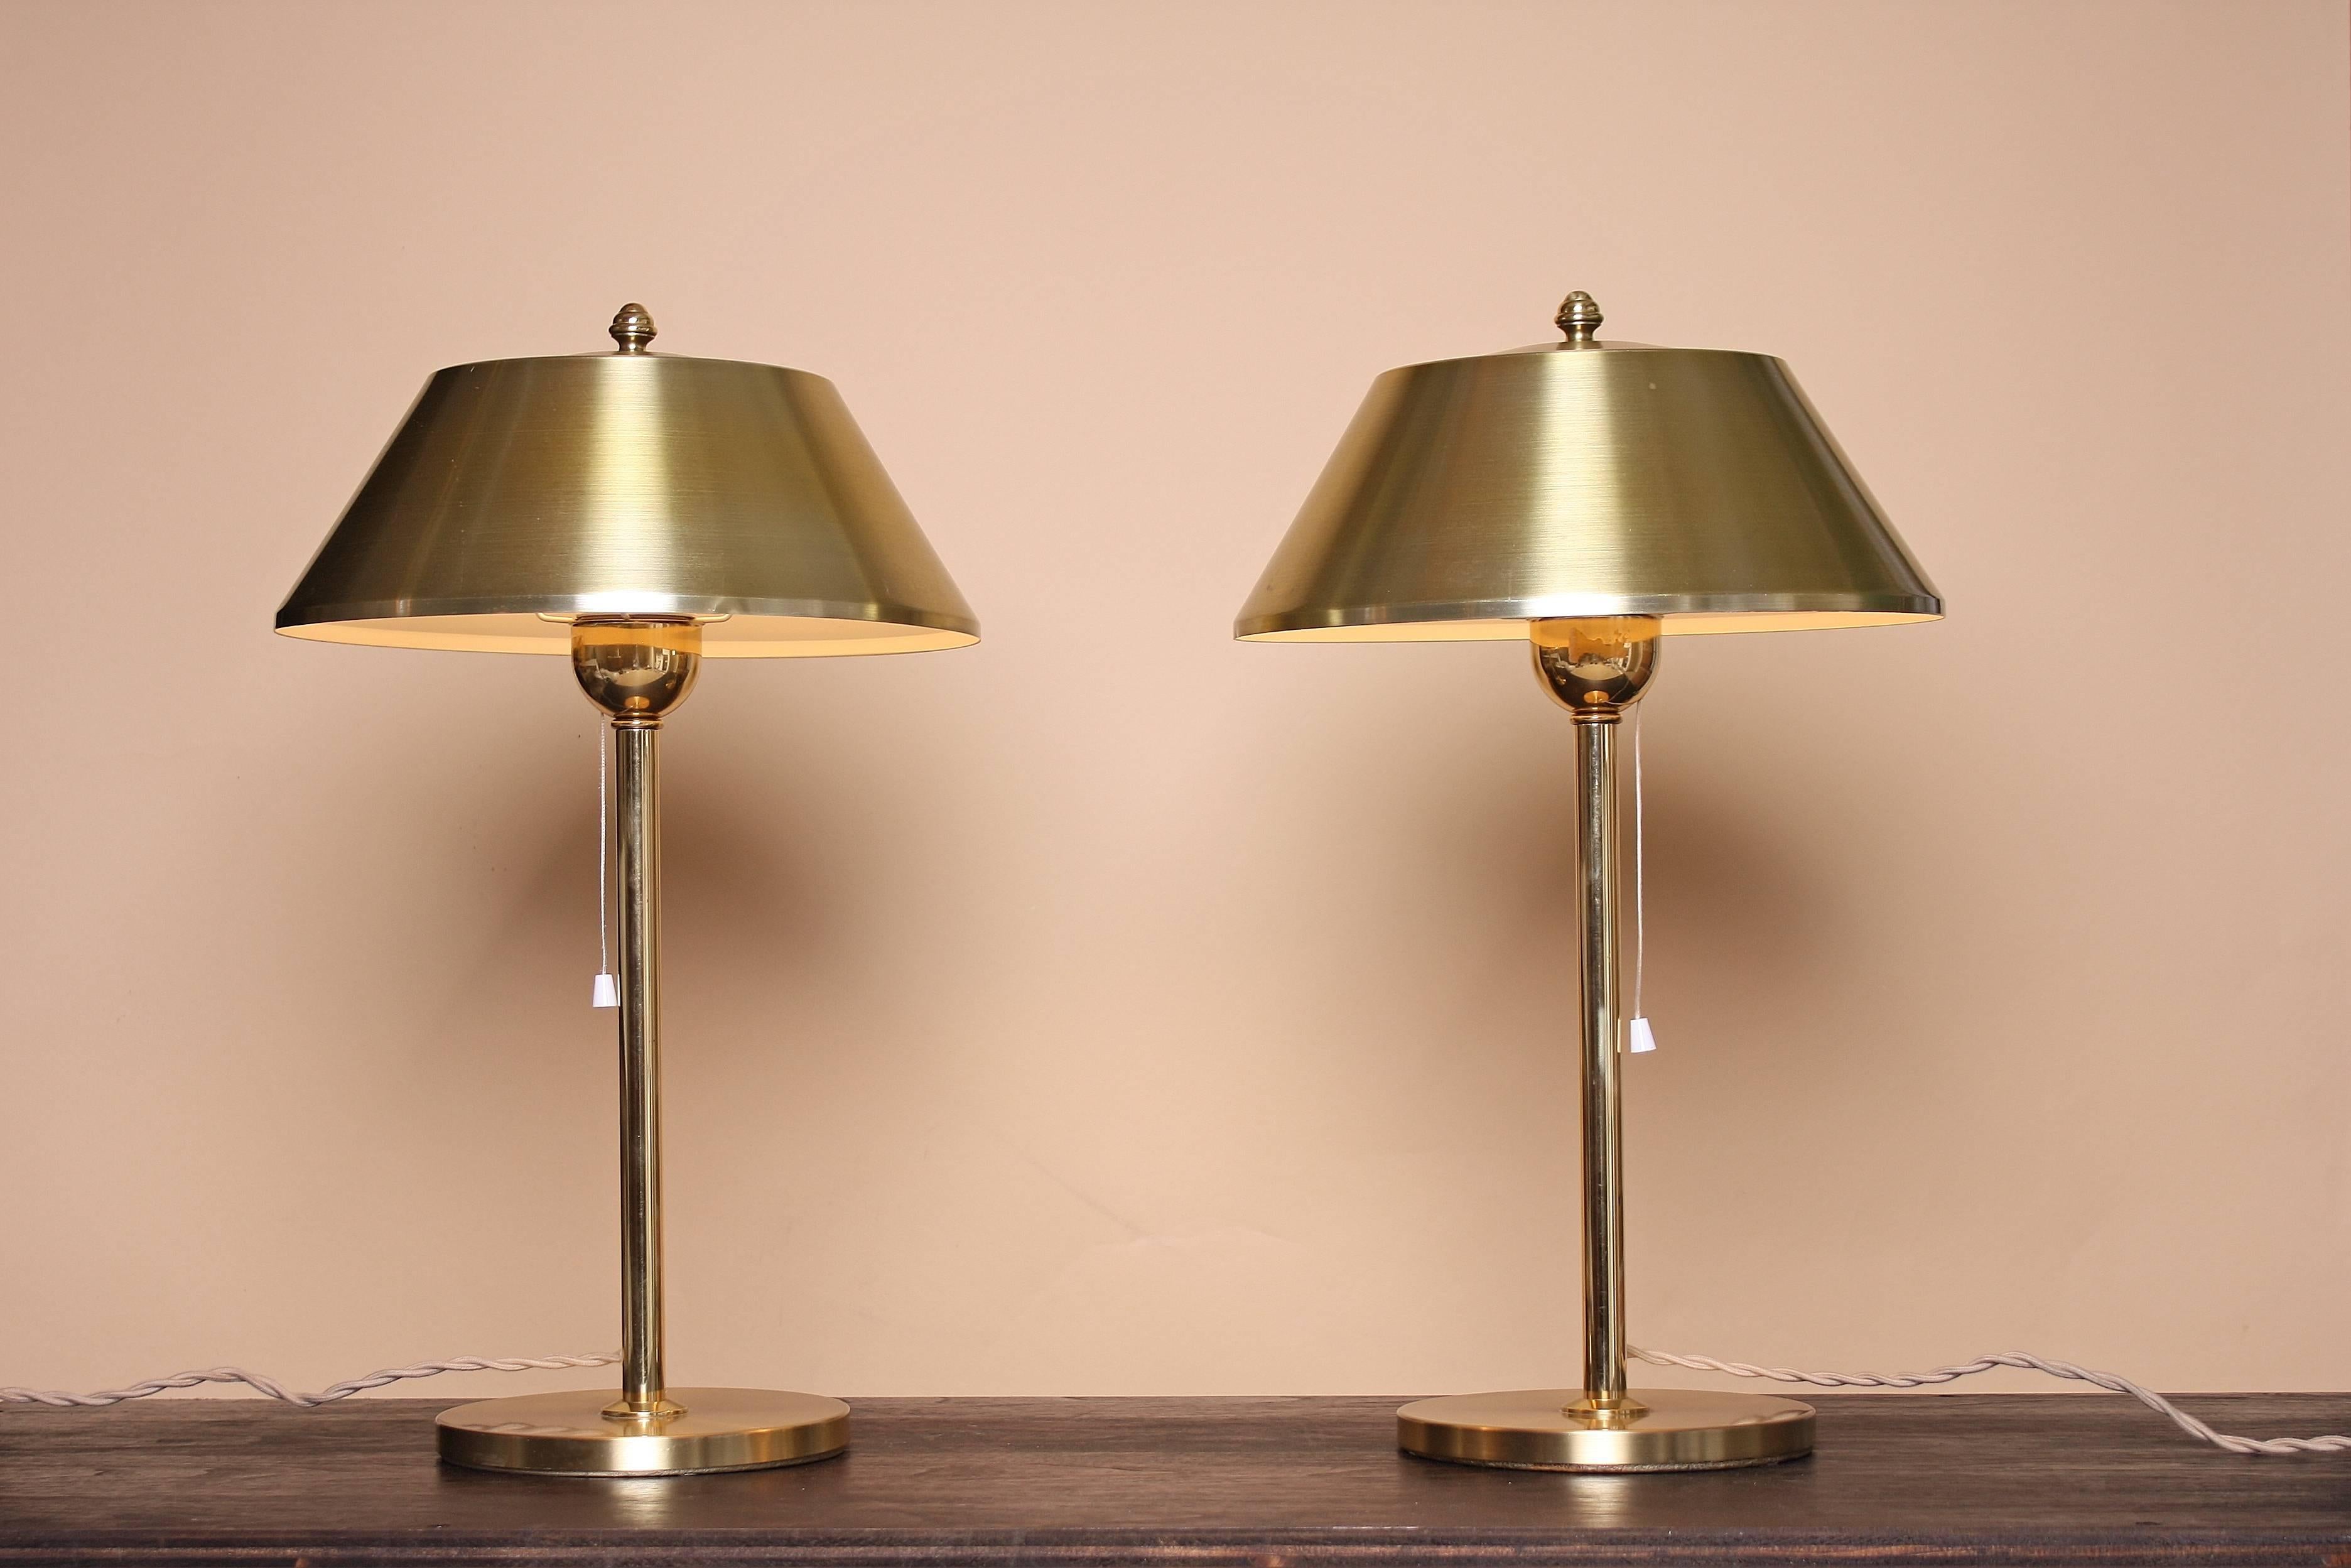 Brass Bedside Lamps by Ewå Värnamo In Excellent Condition For Sale In Santa Monica, CA